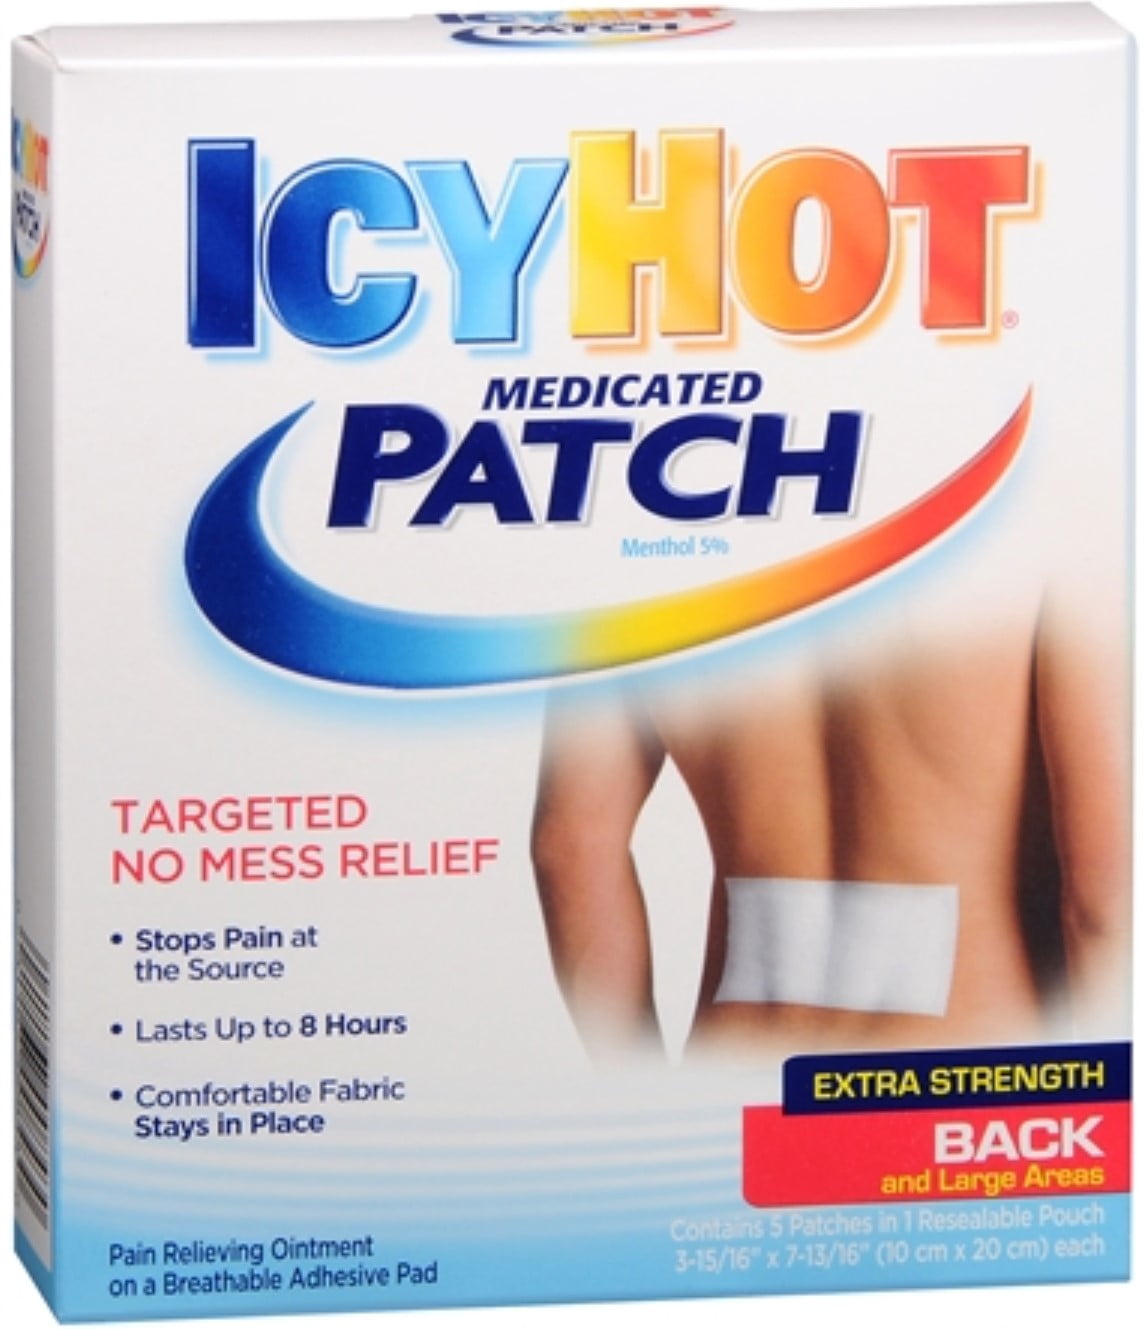 3 Pack Well Patch Cooling Headache Pads Migraine 4 in A box Lasts